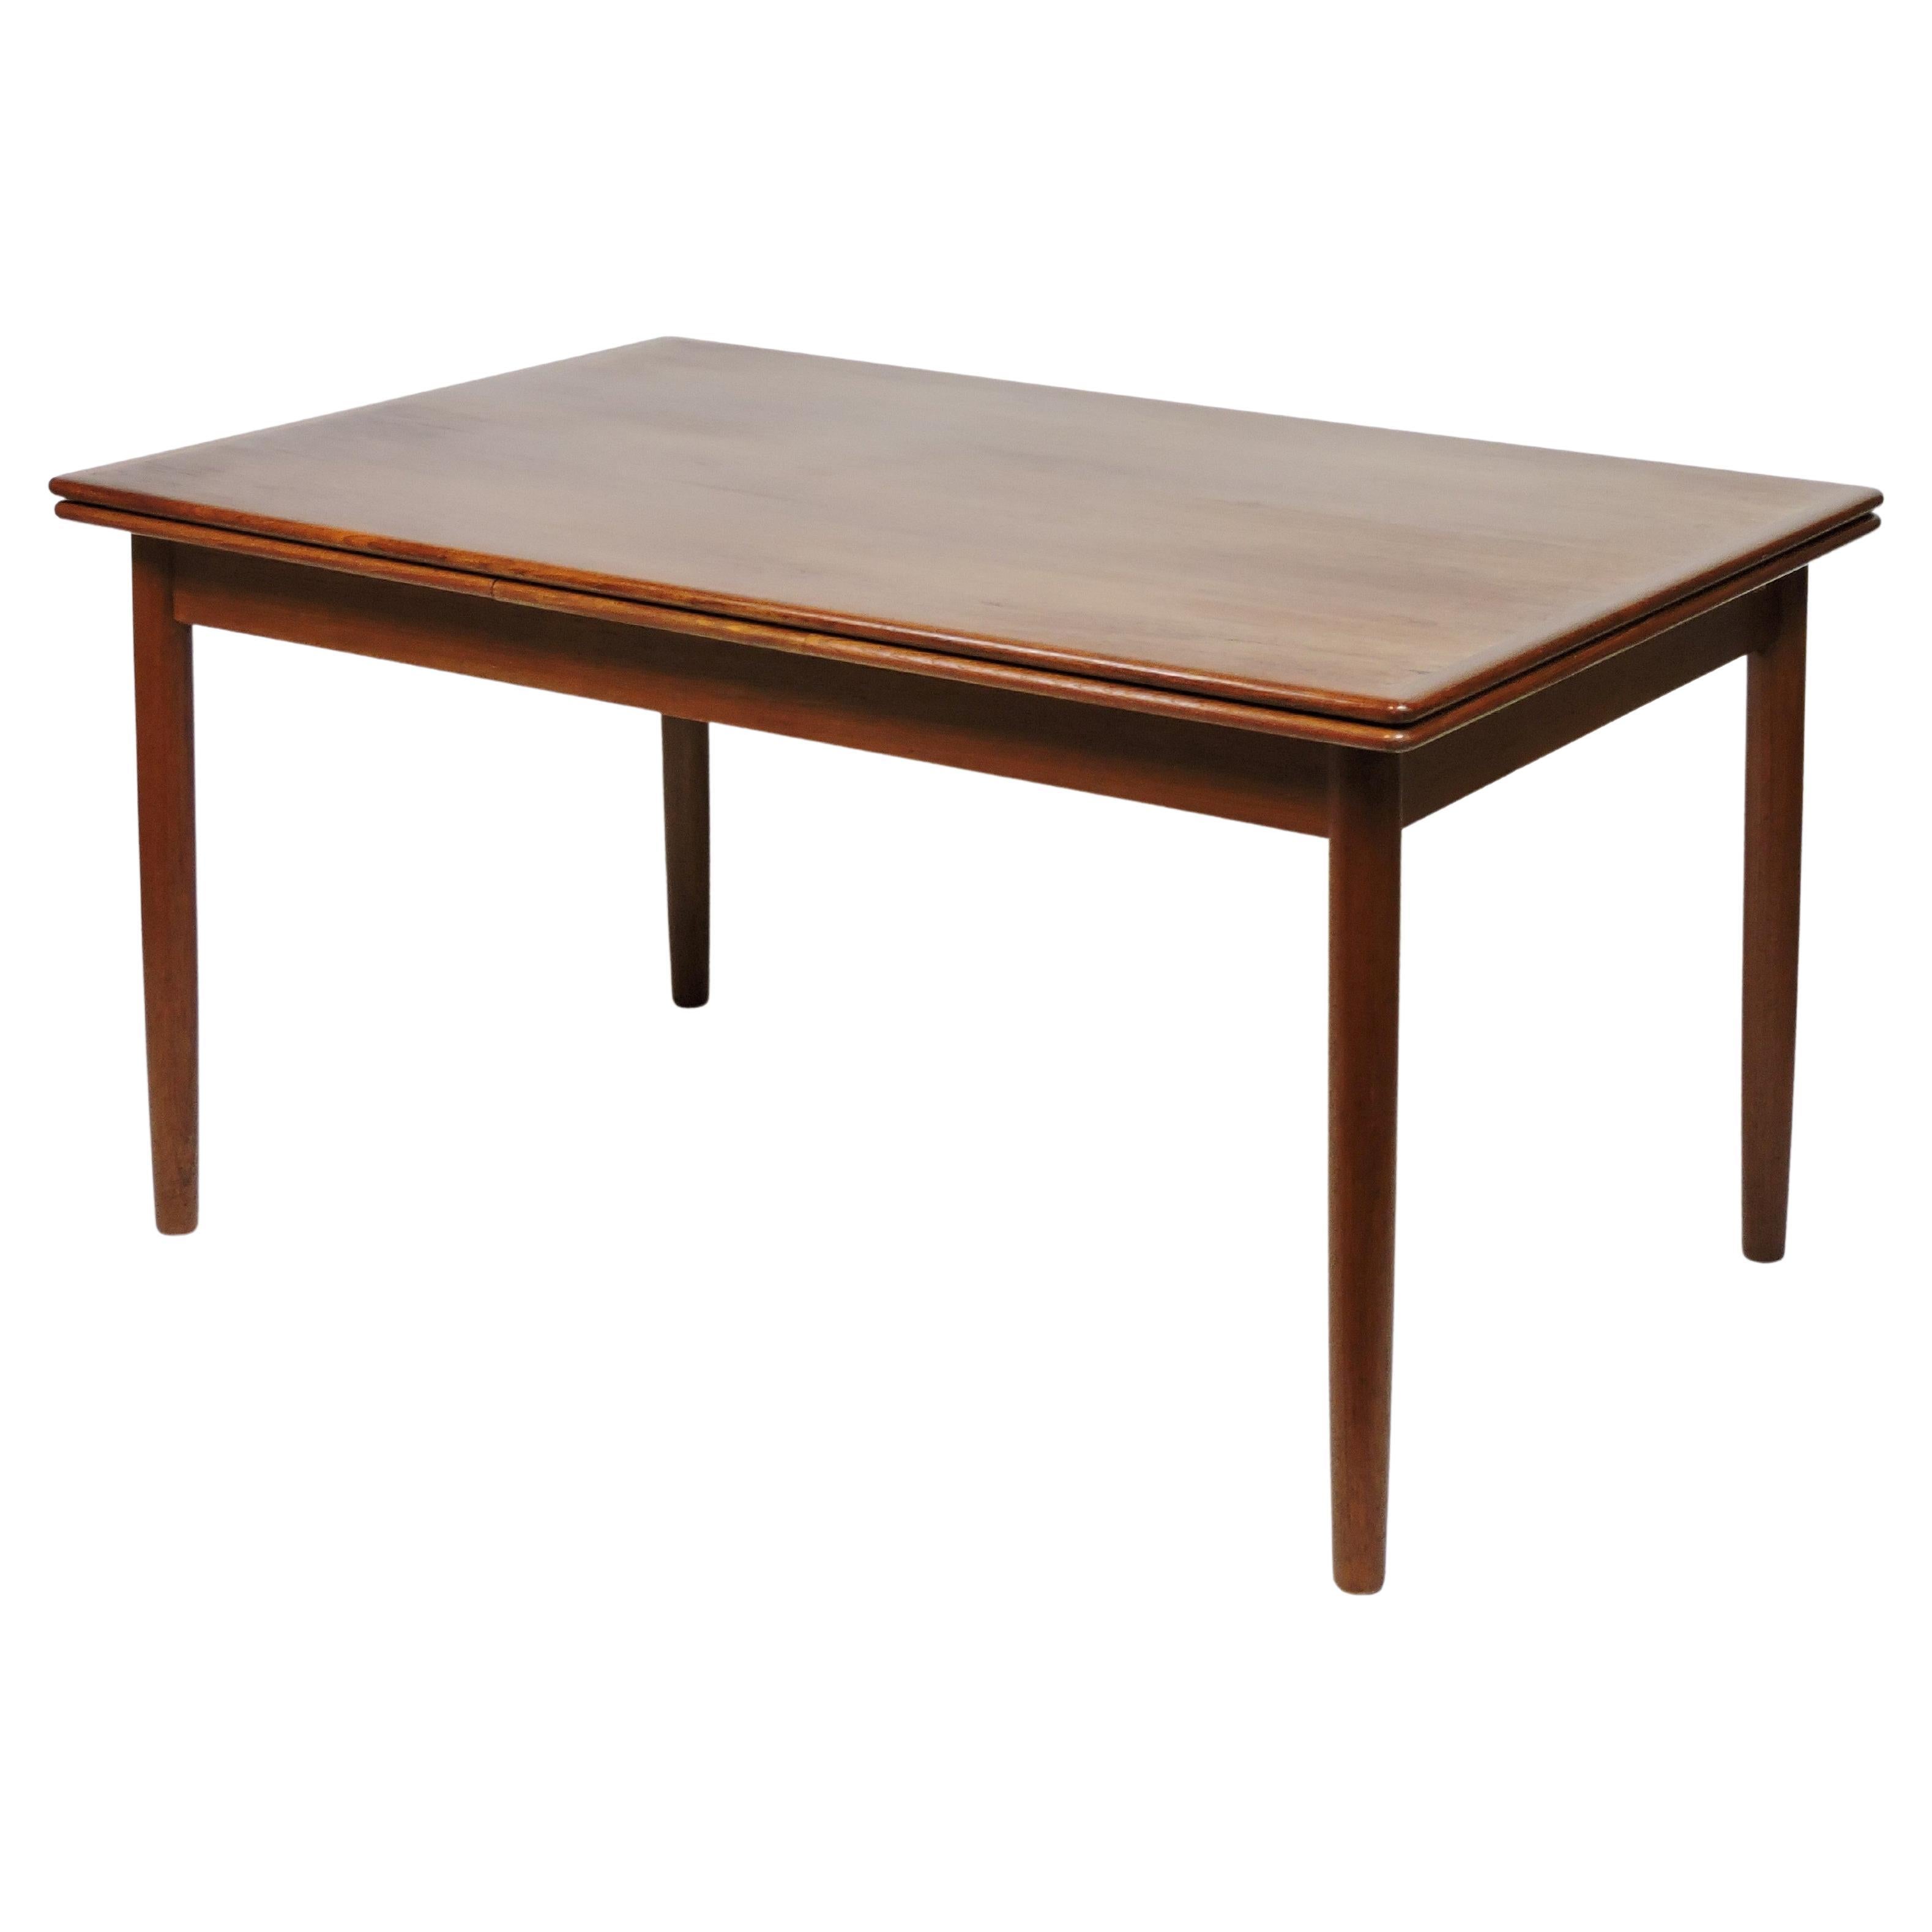 Large Danish Modern Teak Extendable Dining Table with Self-Storing Leaves